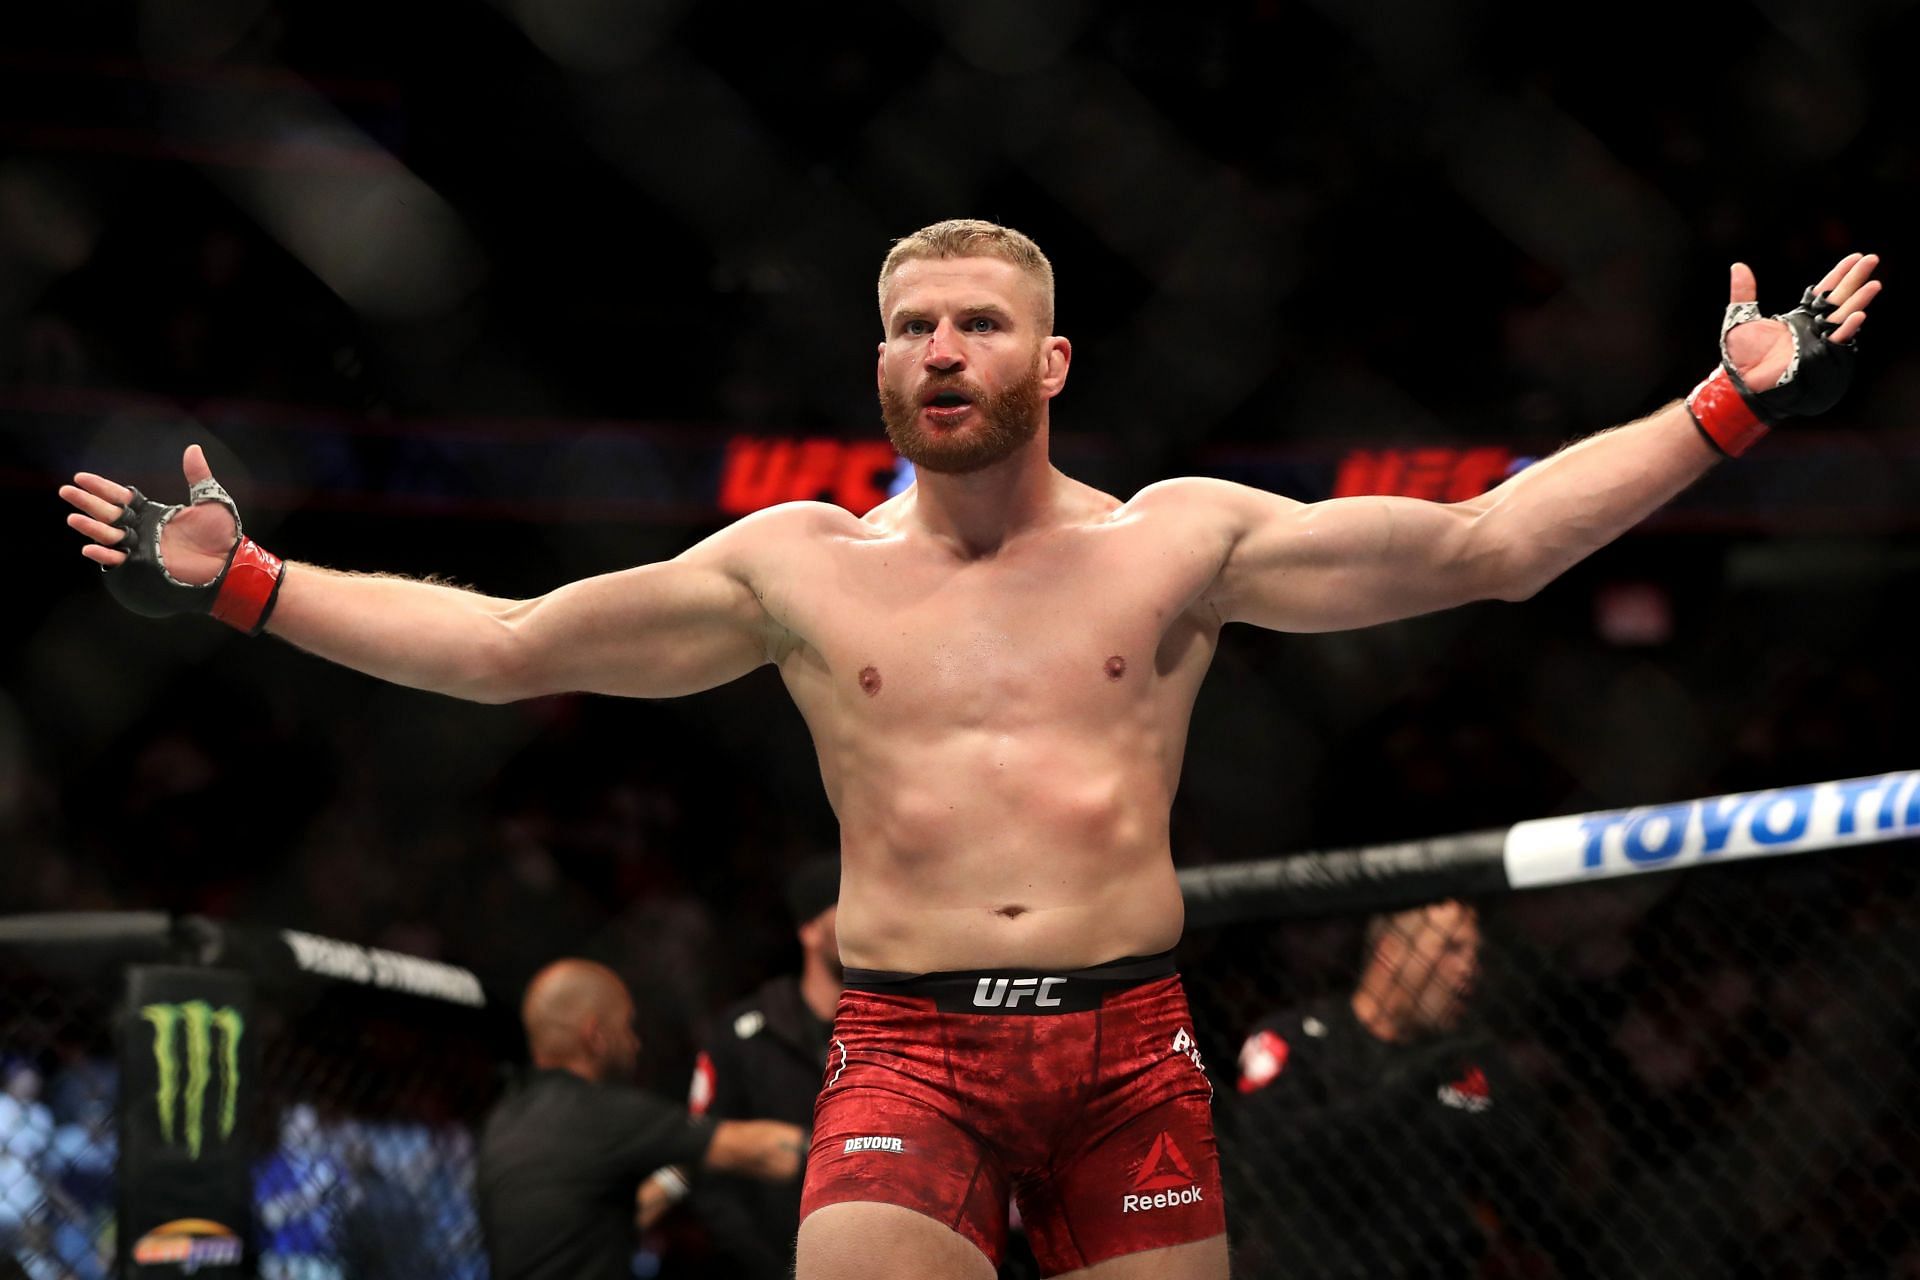 UFC light-heavyweight champ Jan Blachowicz is set to fight on free TV at UFC 267 this month